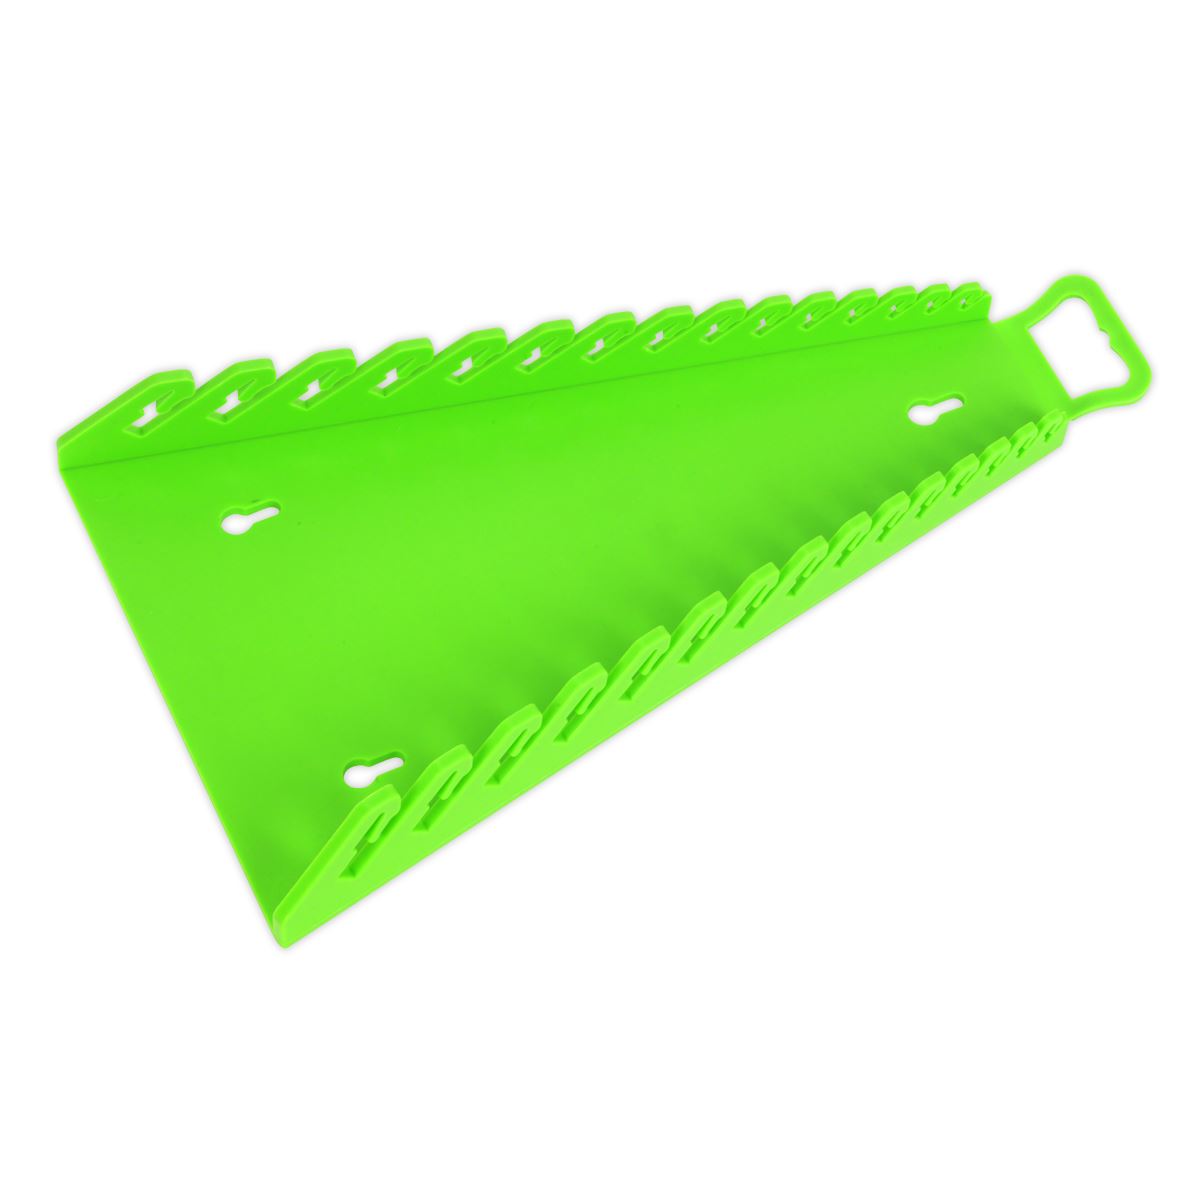 Sealey Premier High Visibility Green Reverse Spanner Rack 15 Capacity Hanging Toolbox